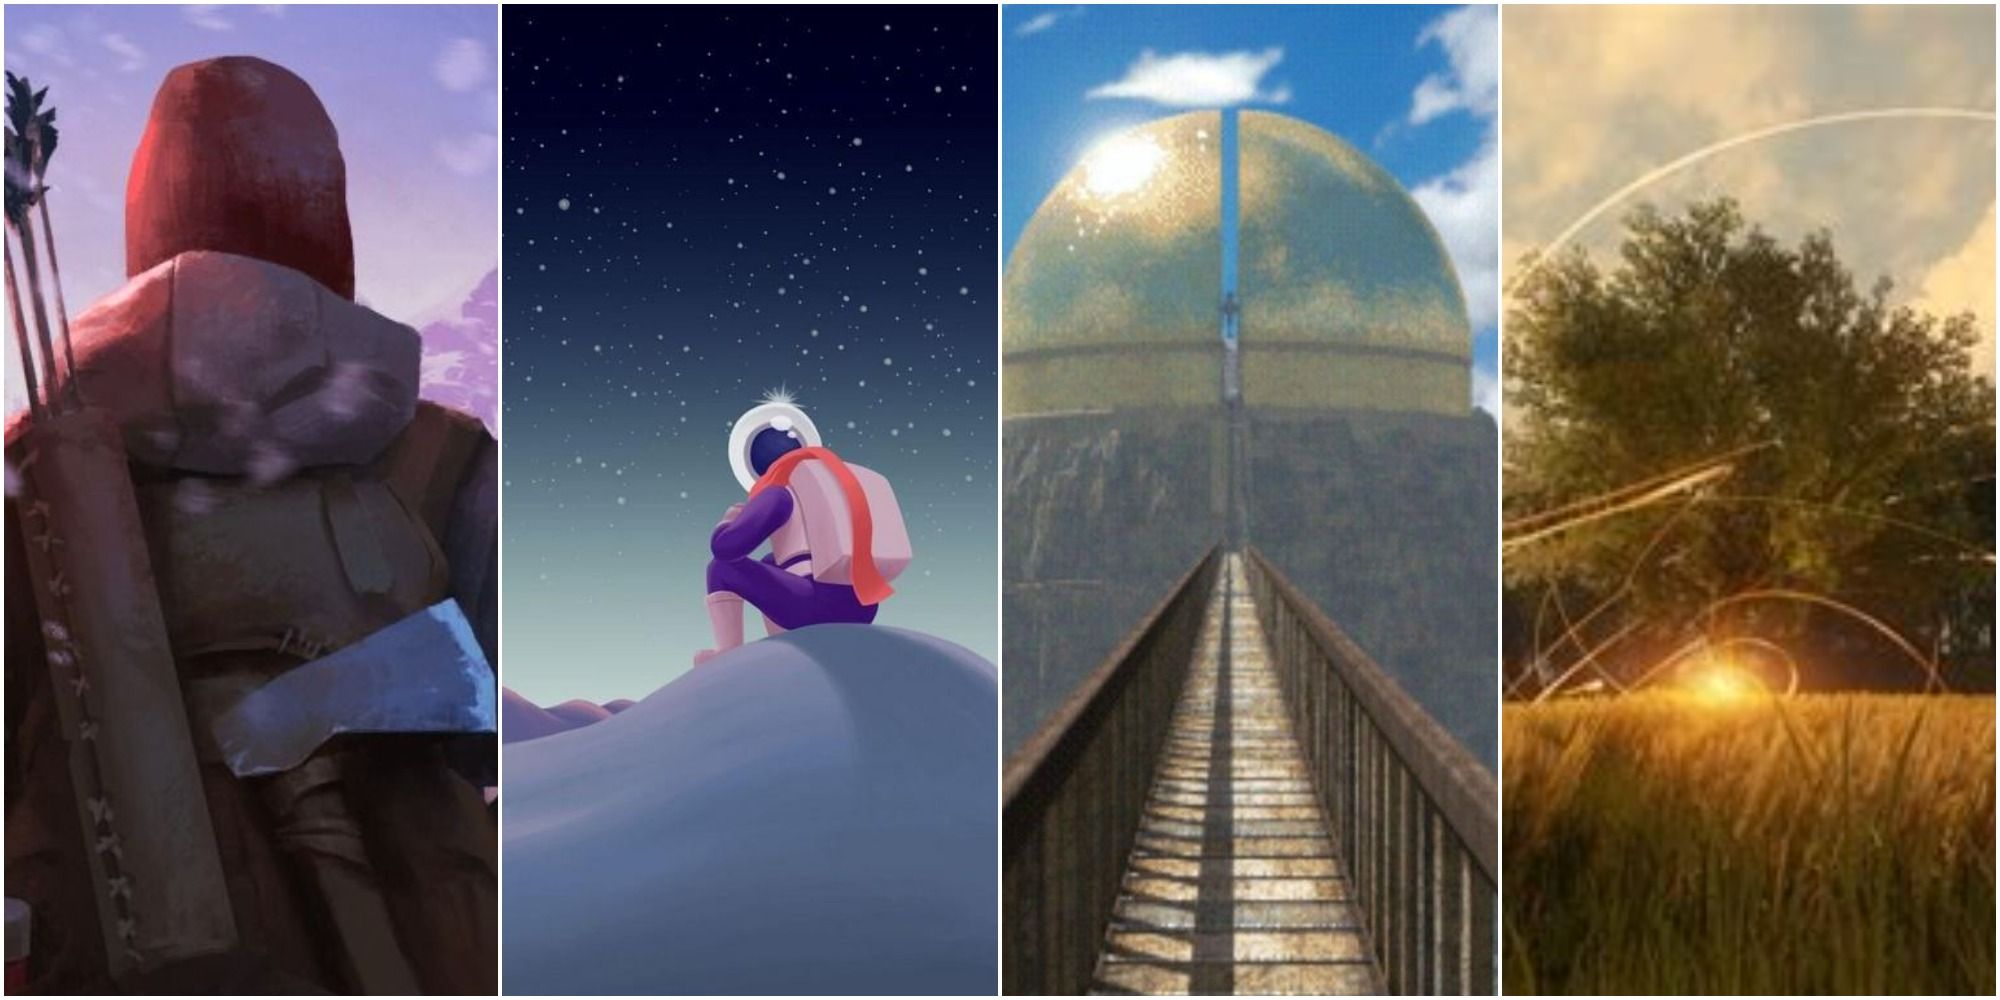 Split image of a man in winter, a figure alone staring up at the stars, a golden dome, and a strange light above a wheat field